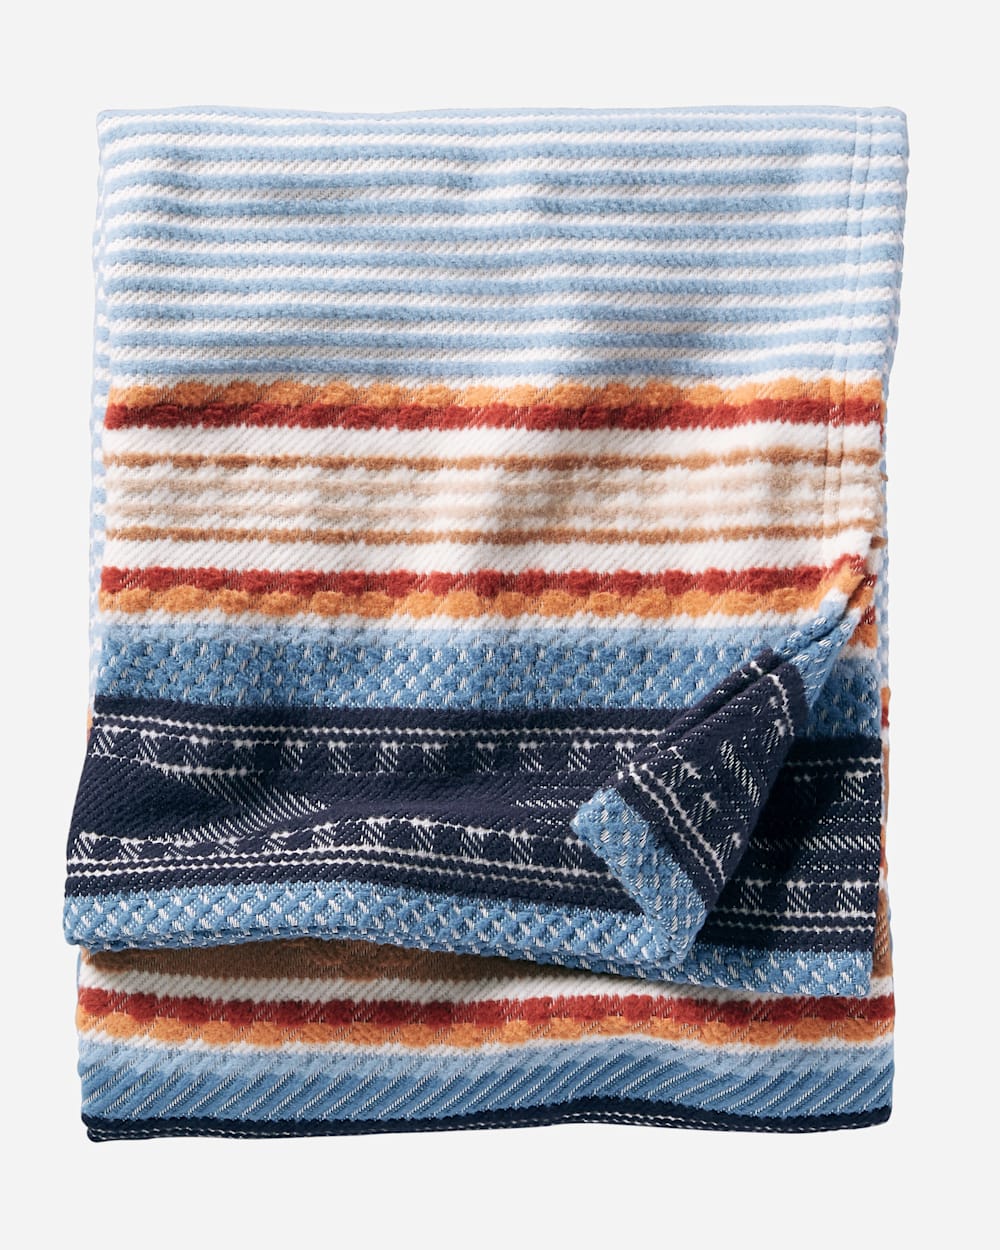 ADDITIONAL VIEW OF ESCALANTE RIDGE COTTON BLANKET IN DENIM image number 2